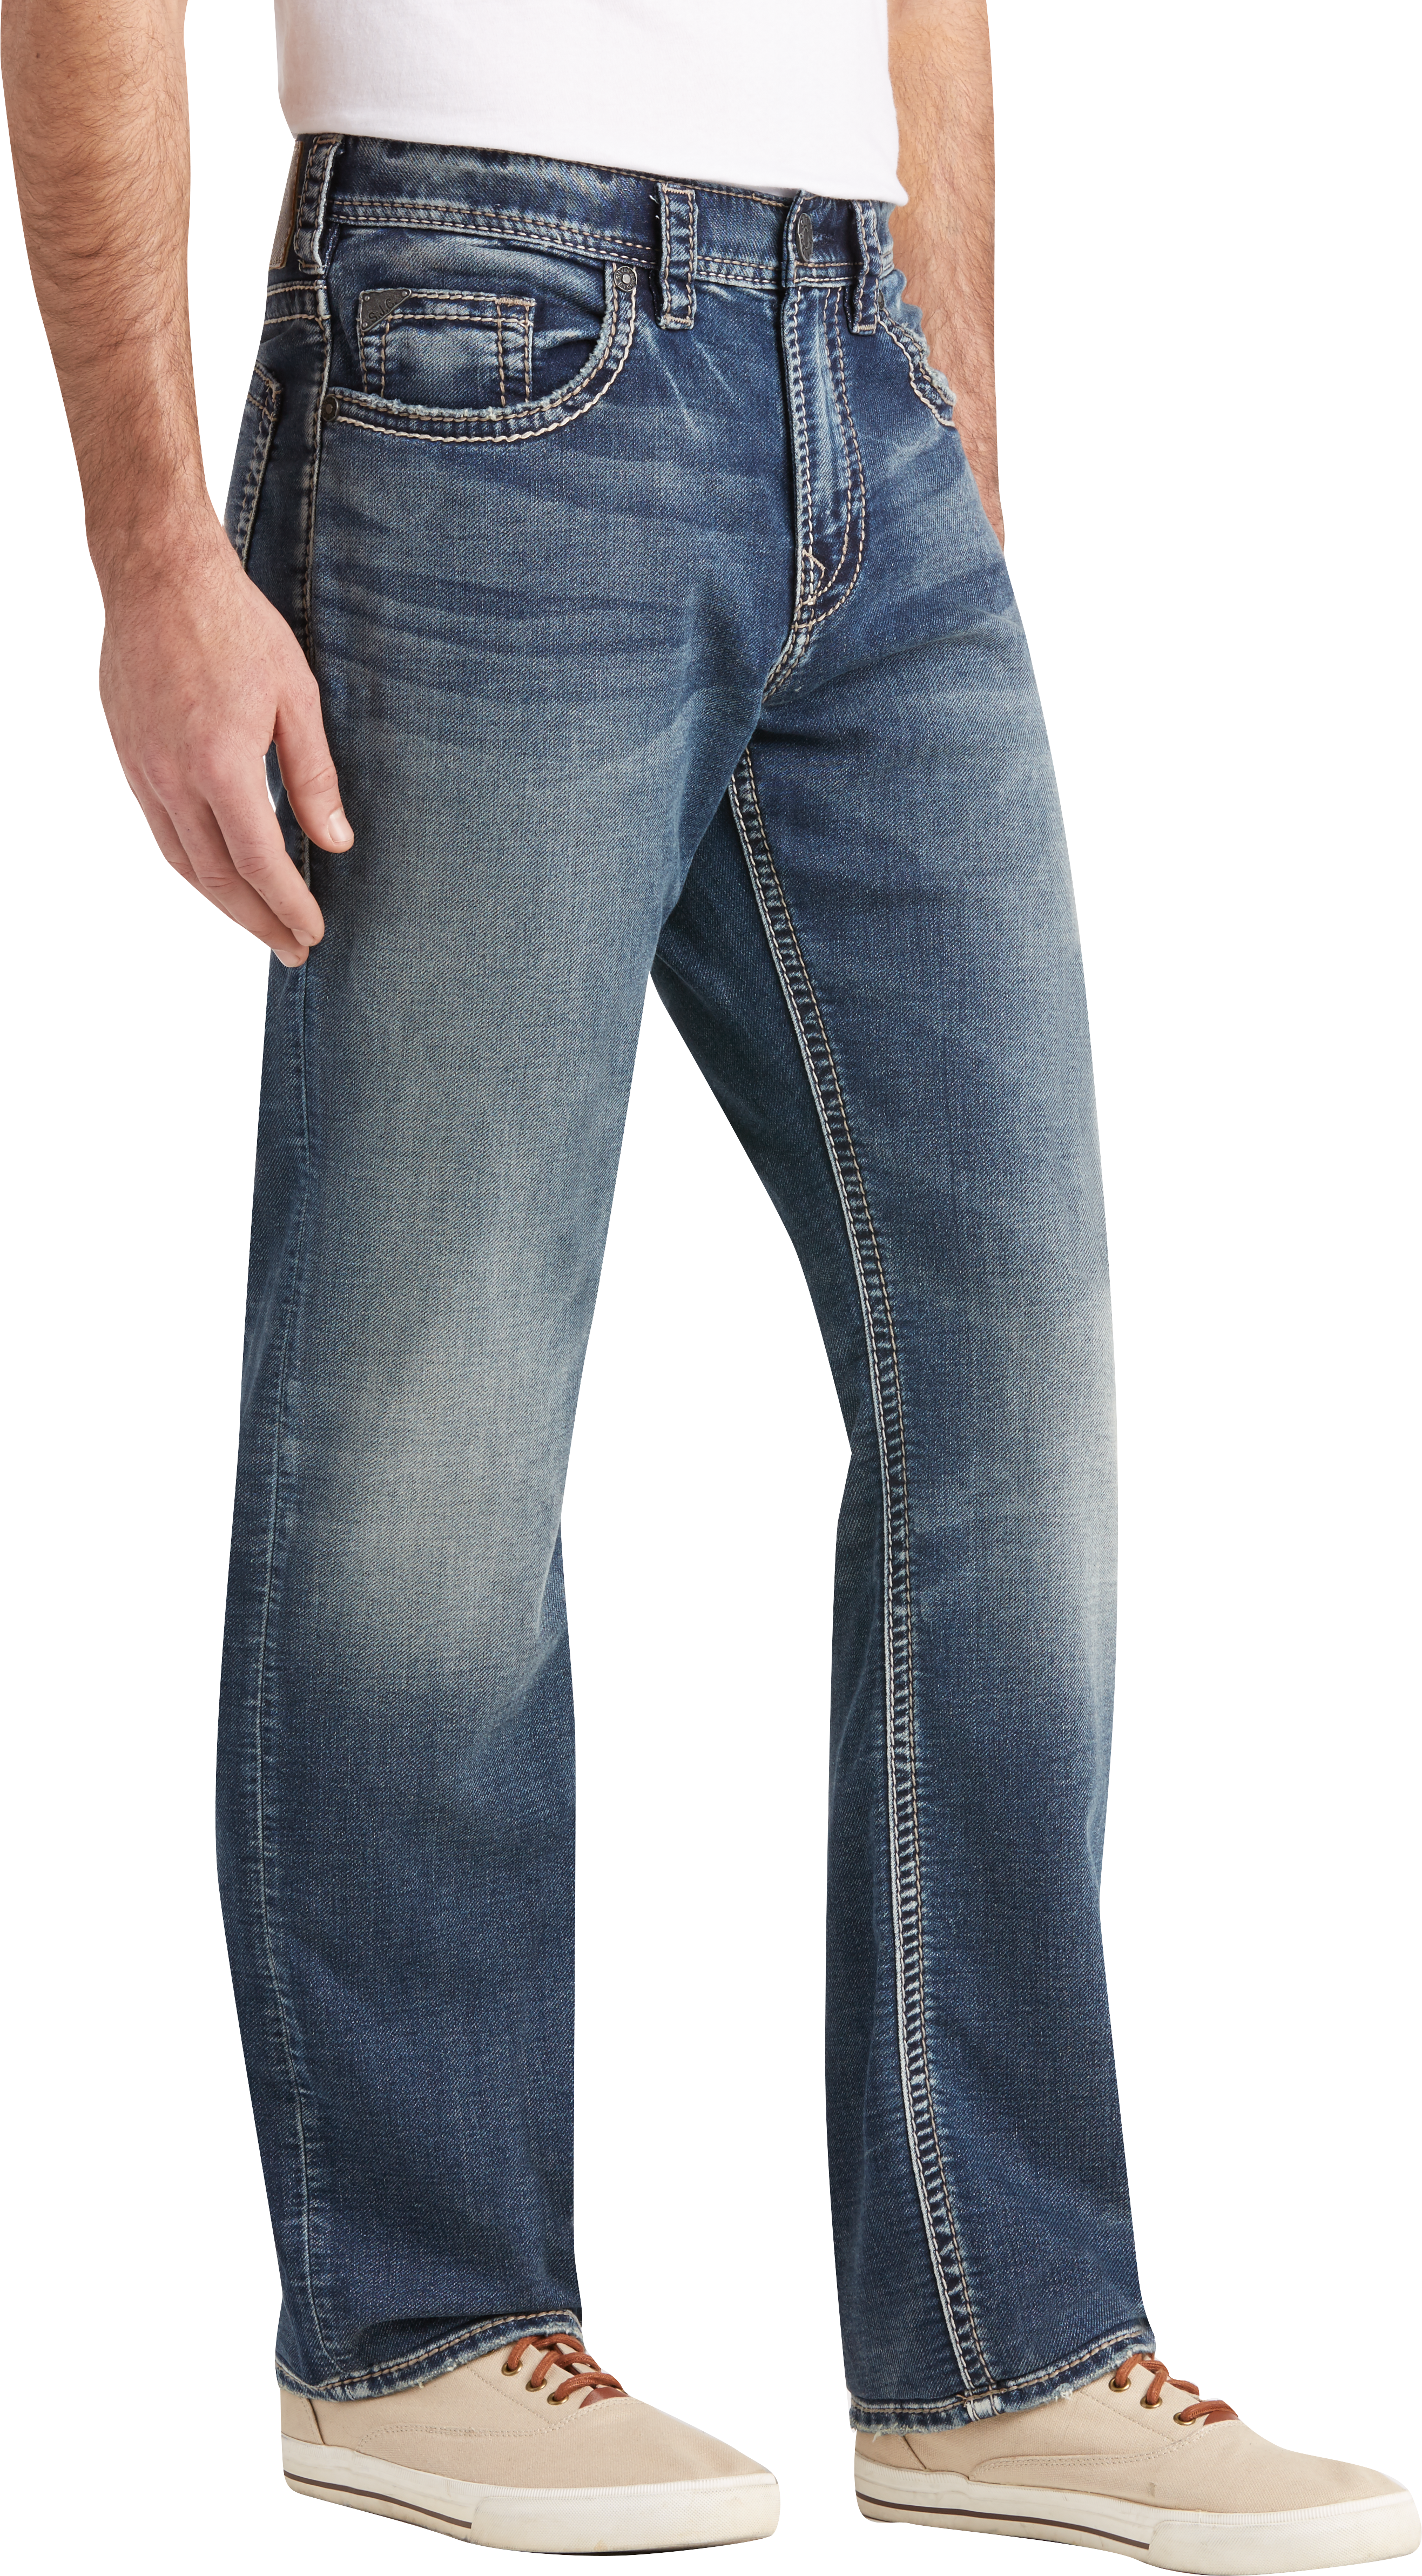 discount silver jeans online